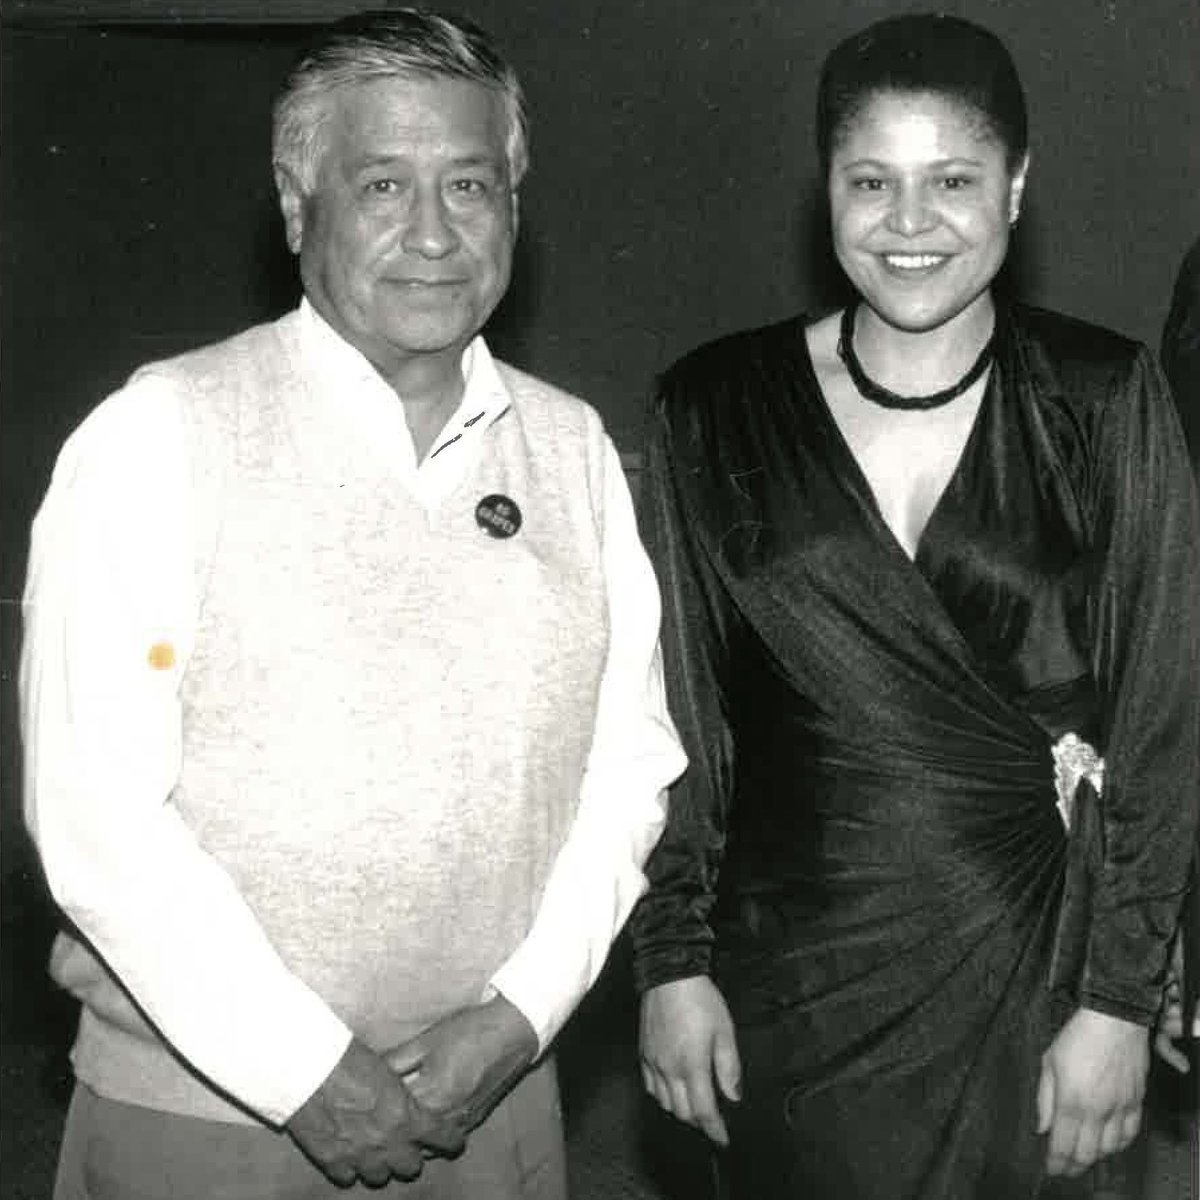 Cesar Chavez reminds us of what is always possible: power in unity. His work shaped our nation and inspired me to join the Delano Grape Boycott with my parents. As the City observes Cesar Chavez today, we carry on his values to fight for justice and work for the greater good.